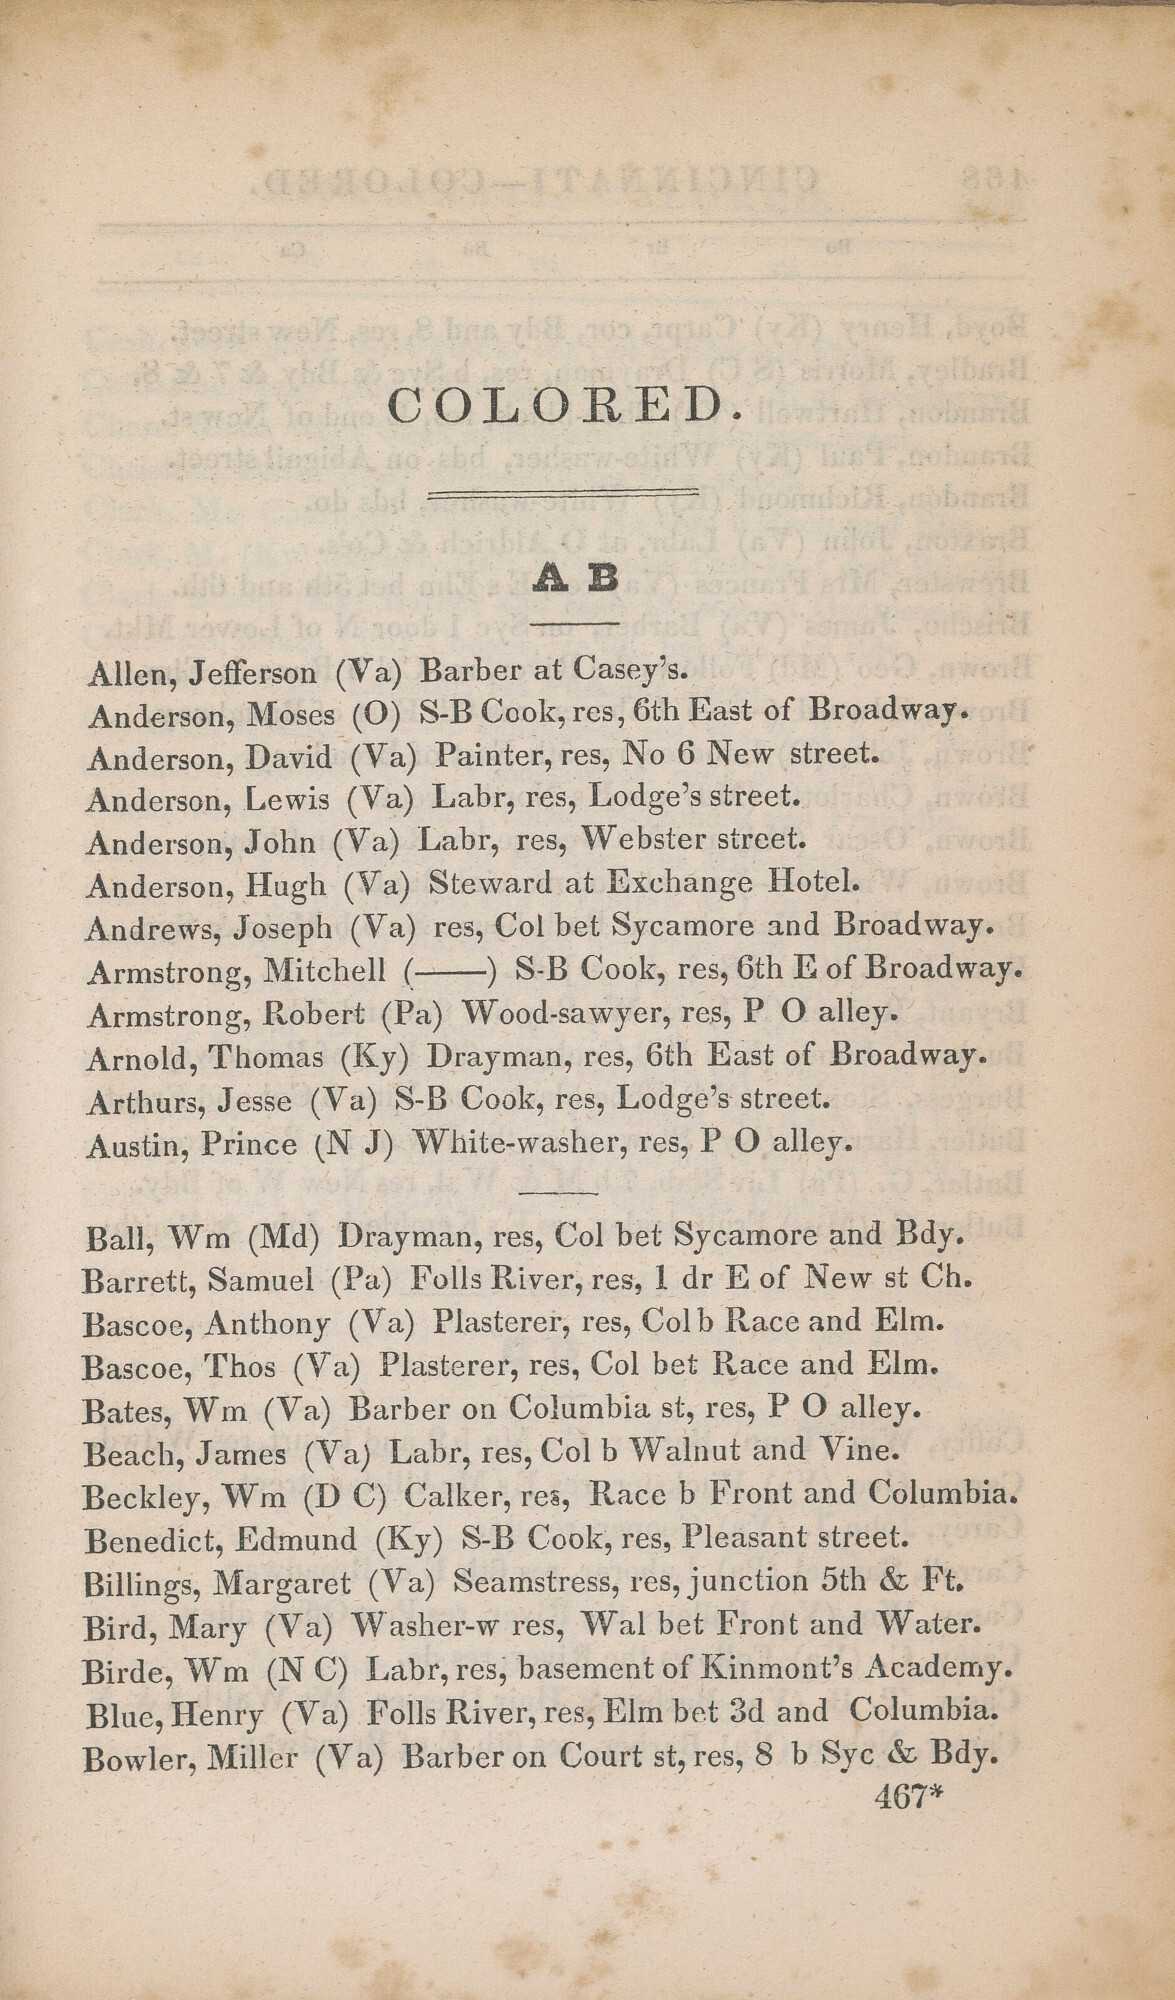 Image of page from The Cincinnati, Covington, Newport and Fulton Directory